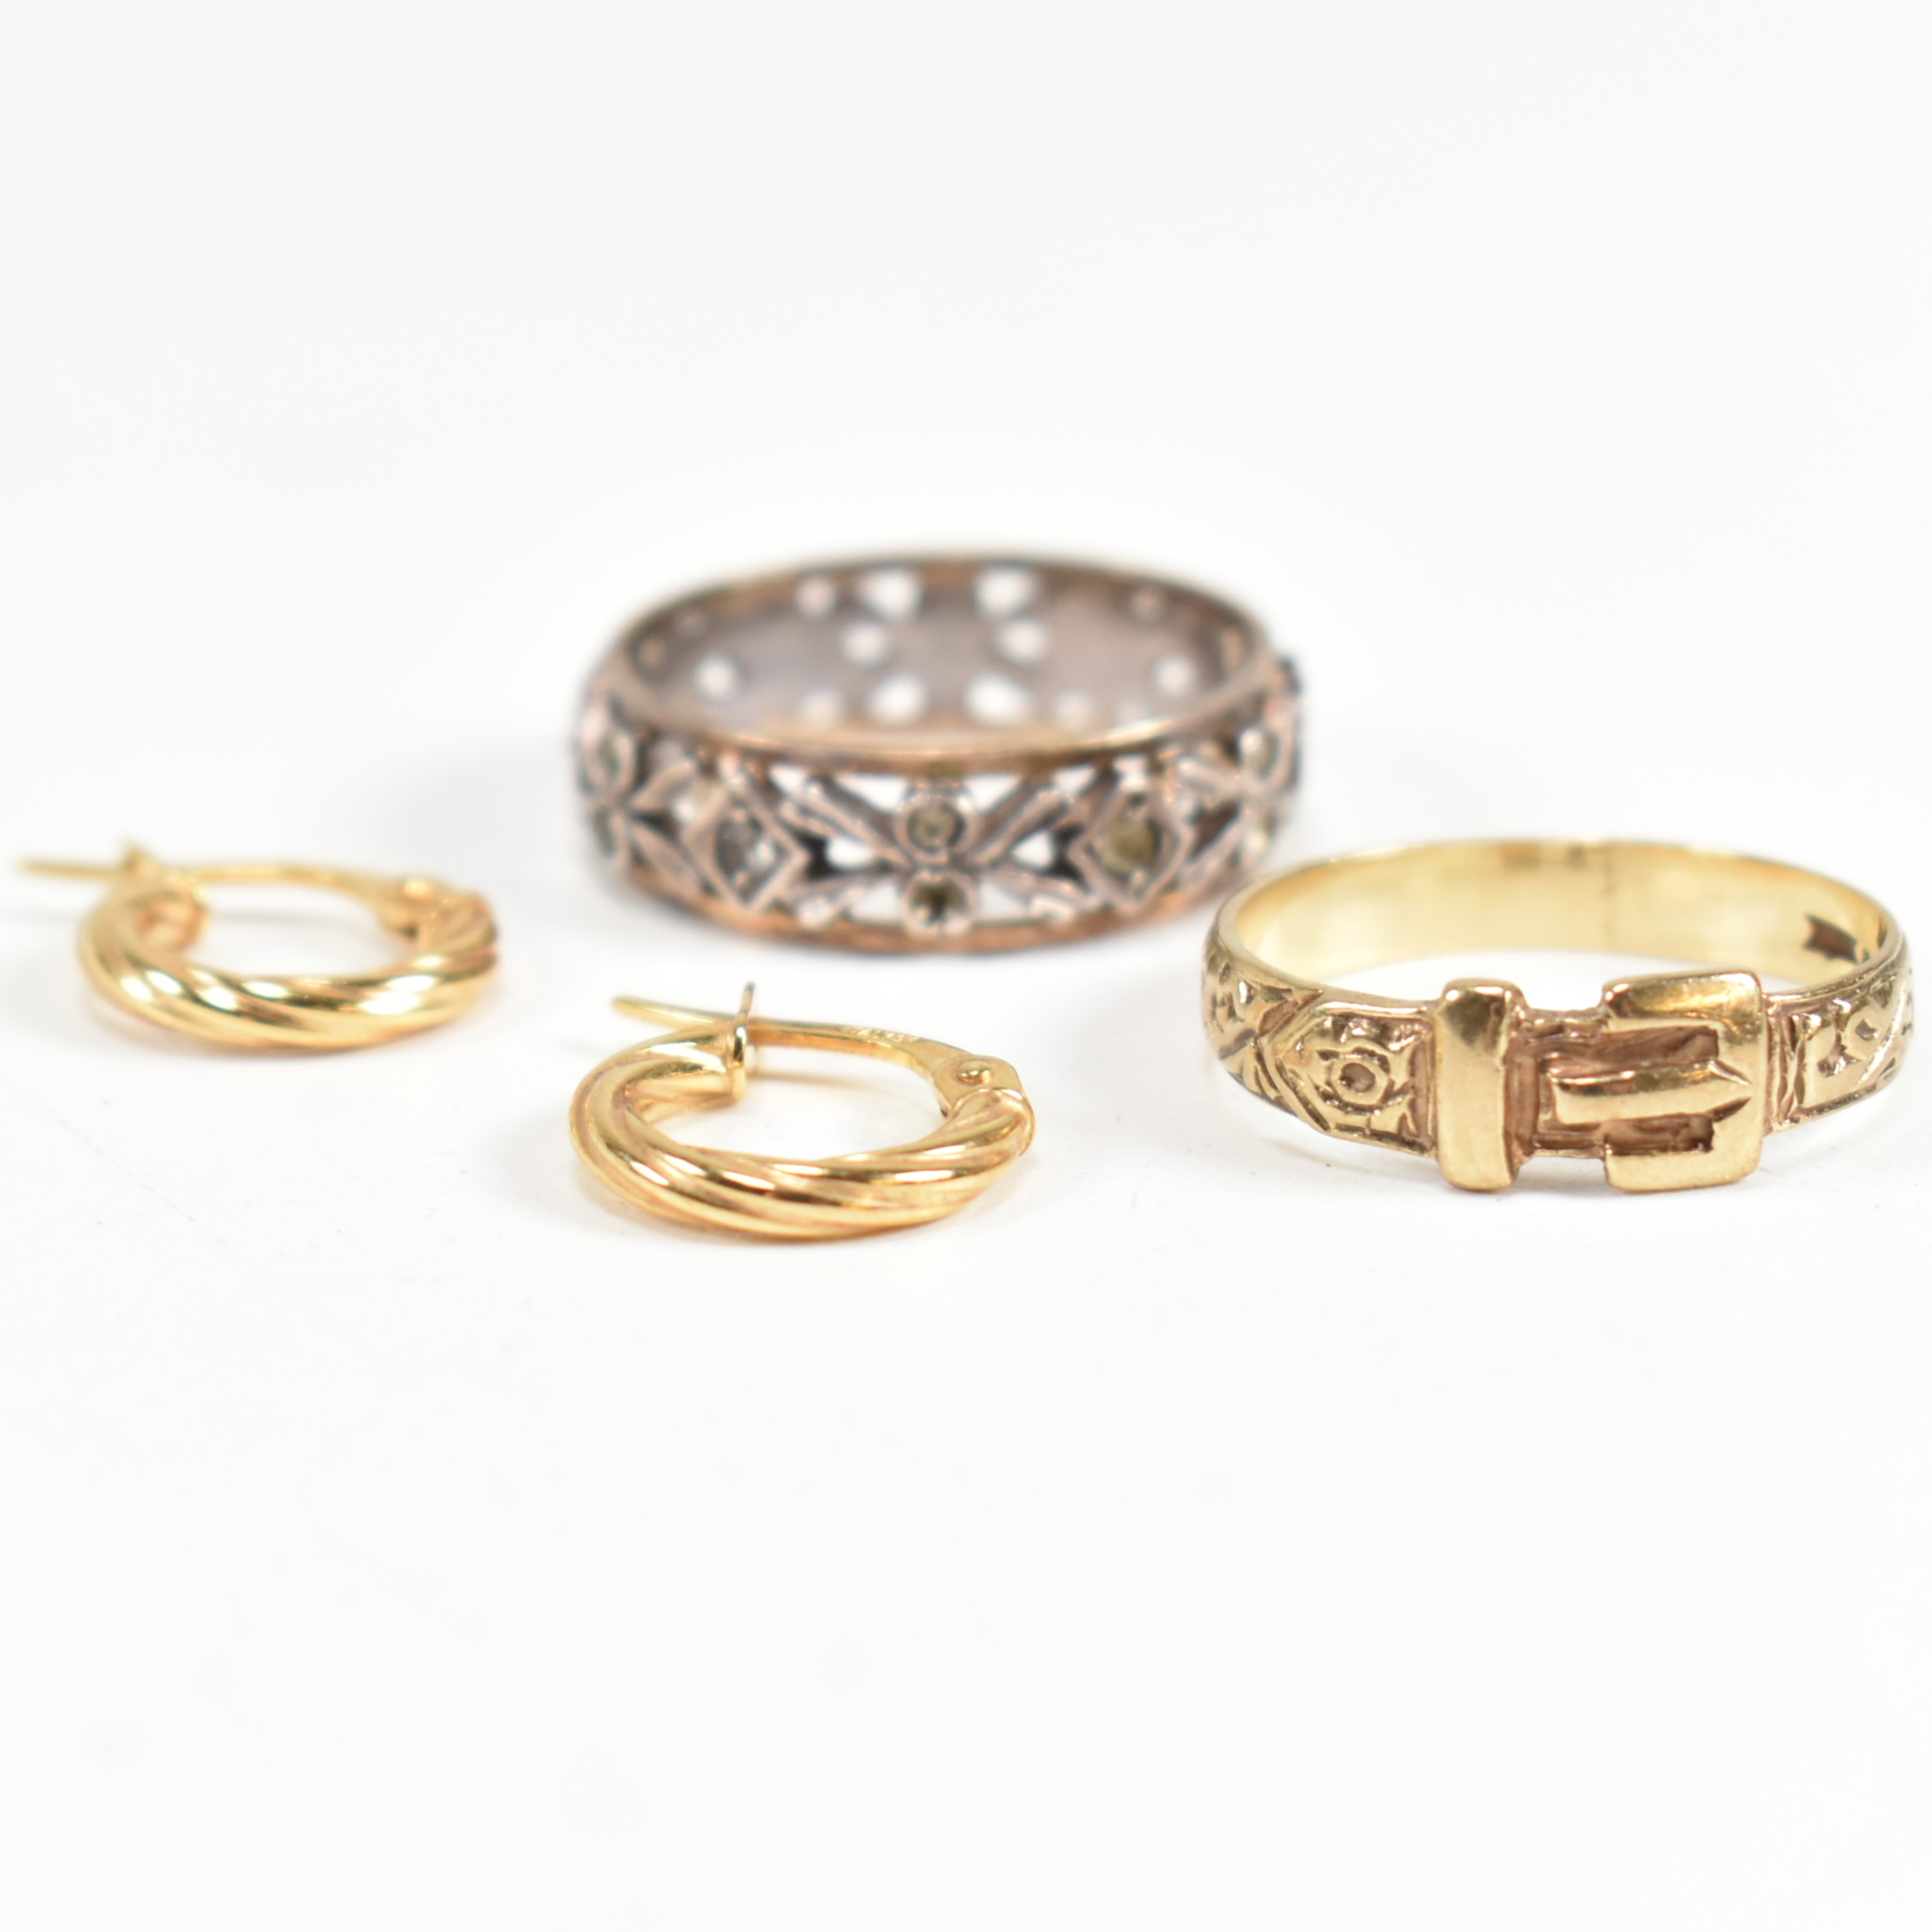 COLLECTION OF 9CT GOLD JEWELLERY INCLUDING GOLD & SILVER ETERNITY RING - Image 4 of 13